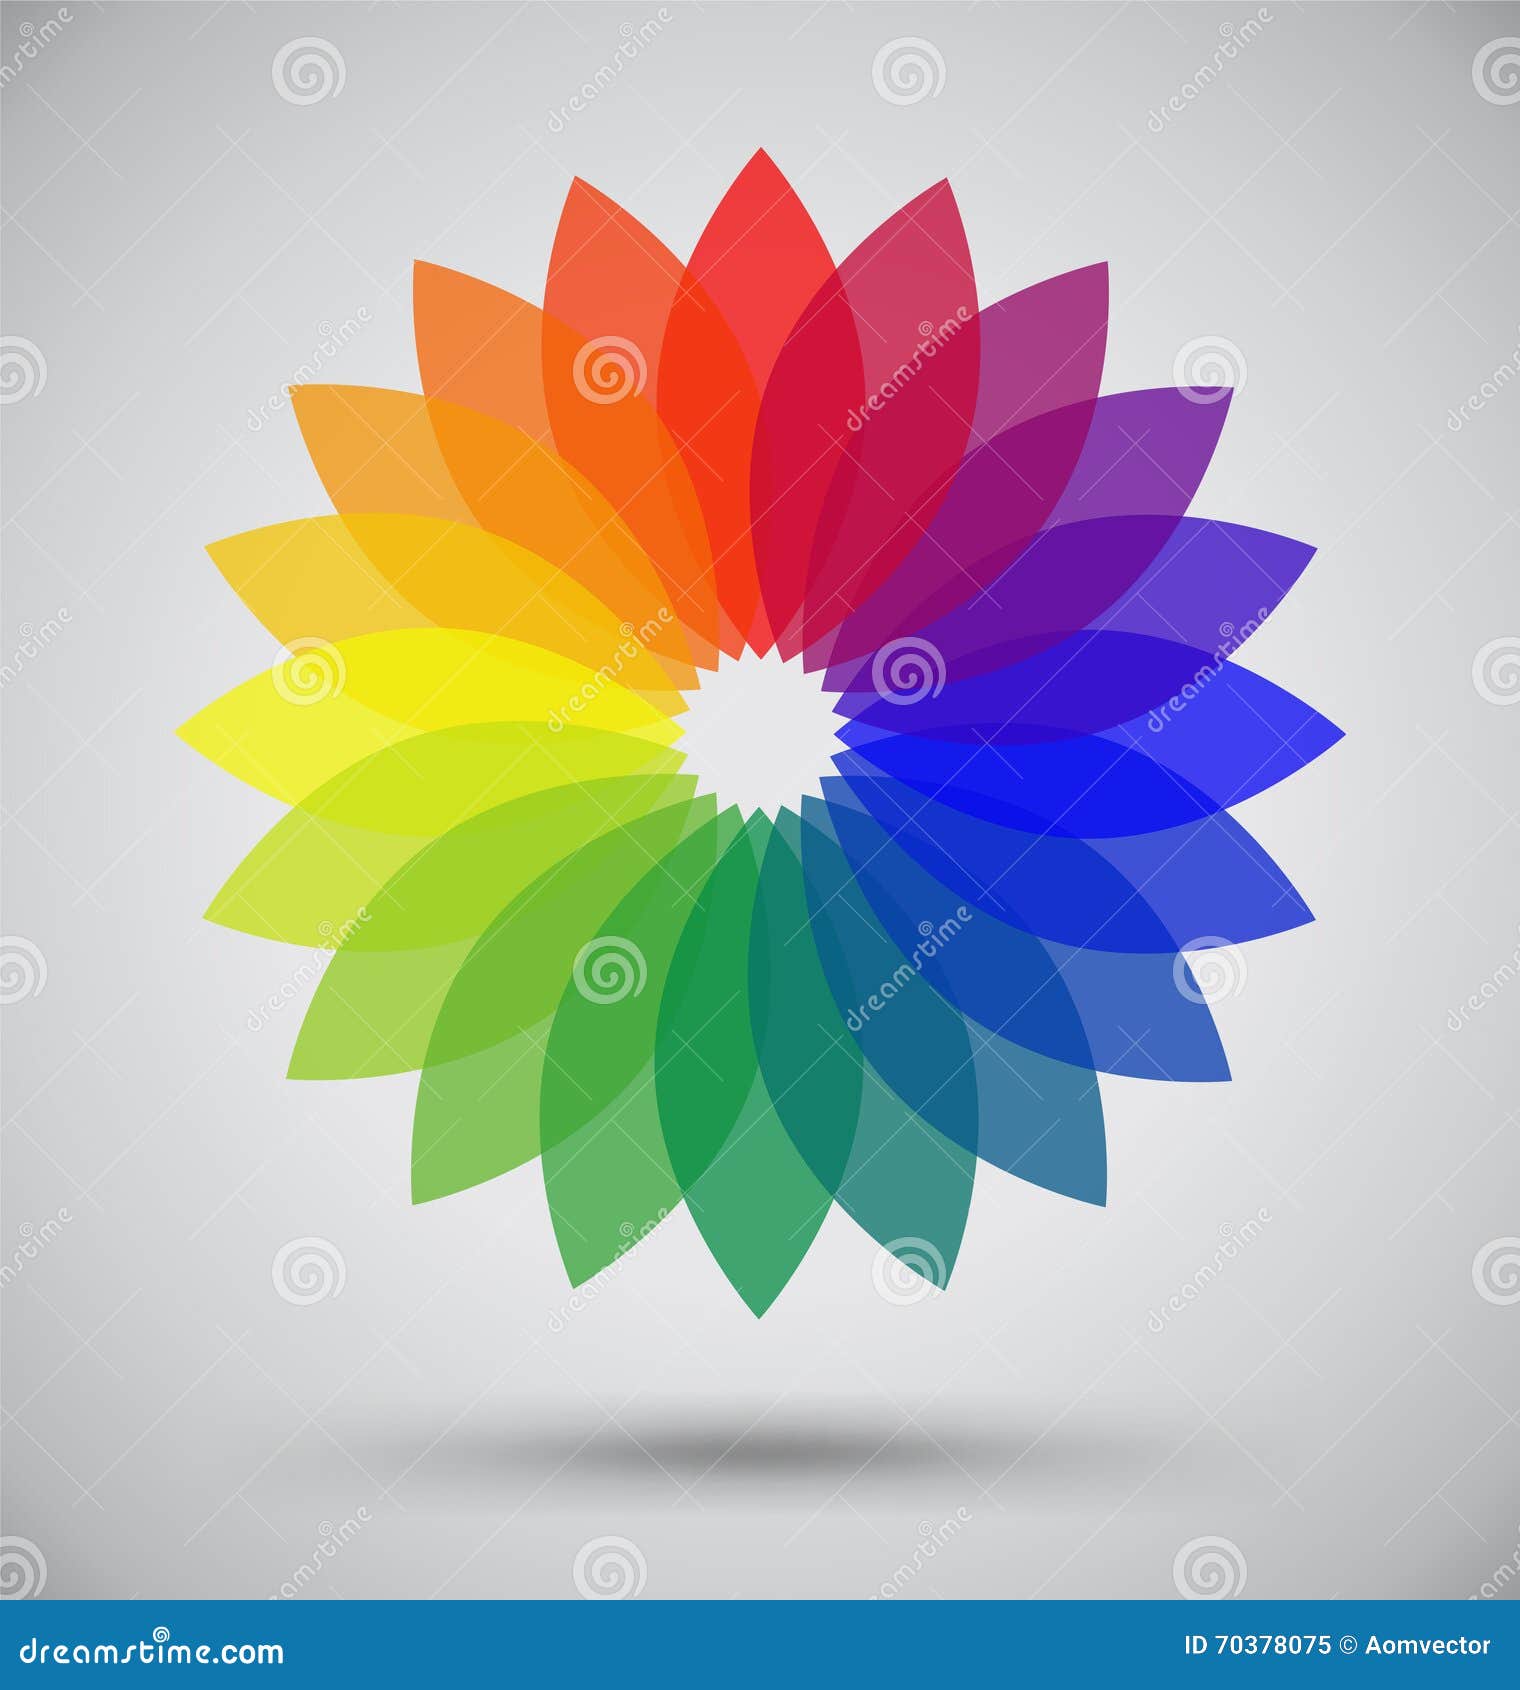 abstract colorful spectrum flower petal